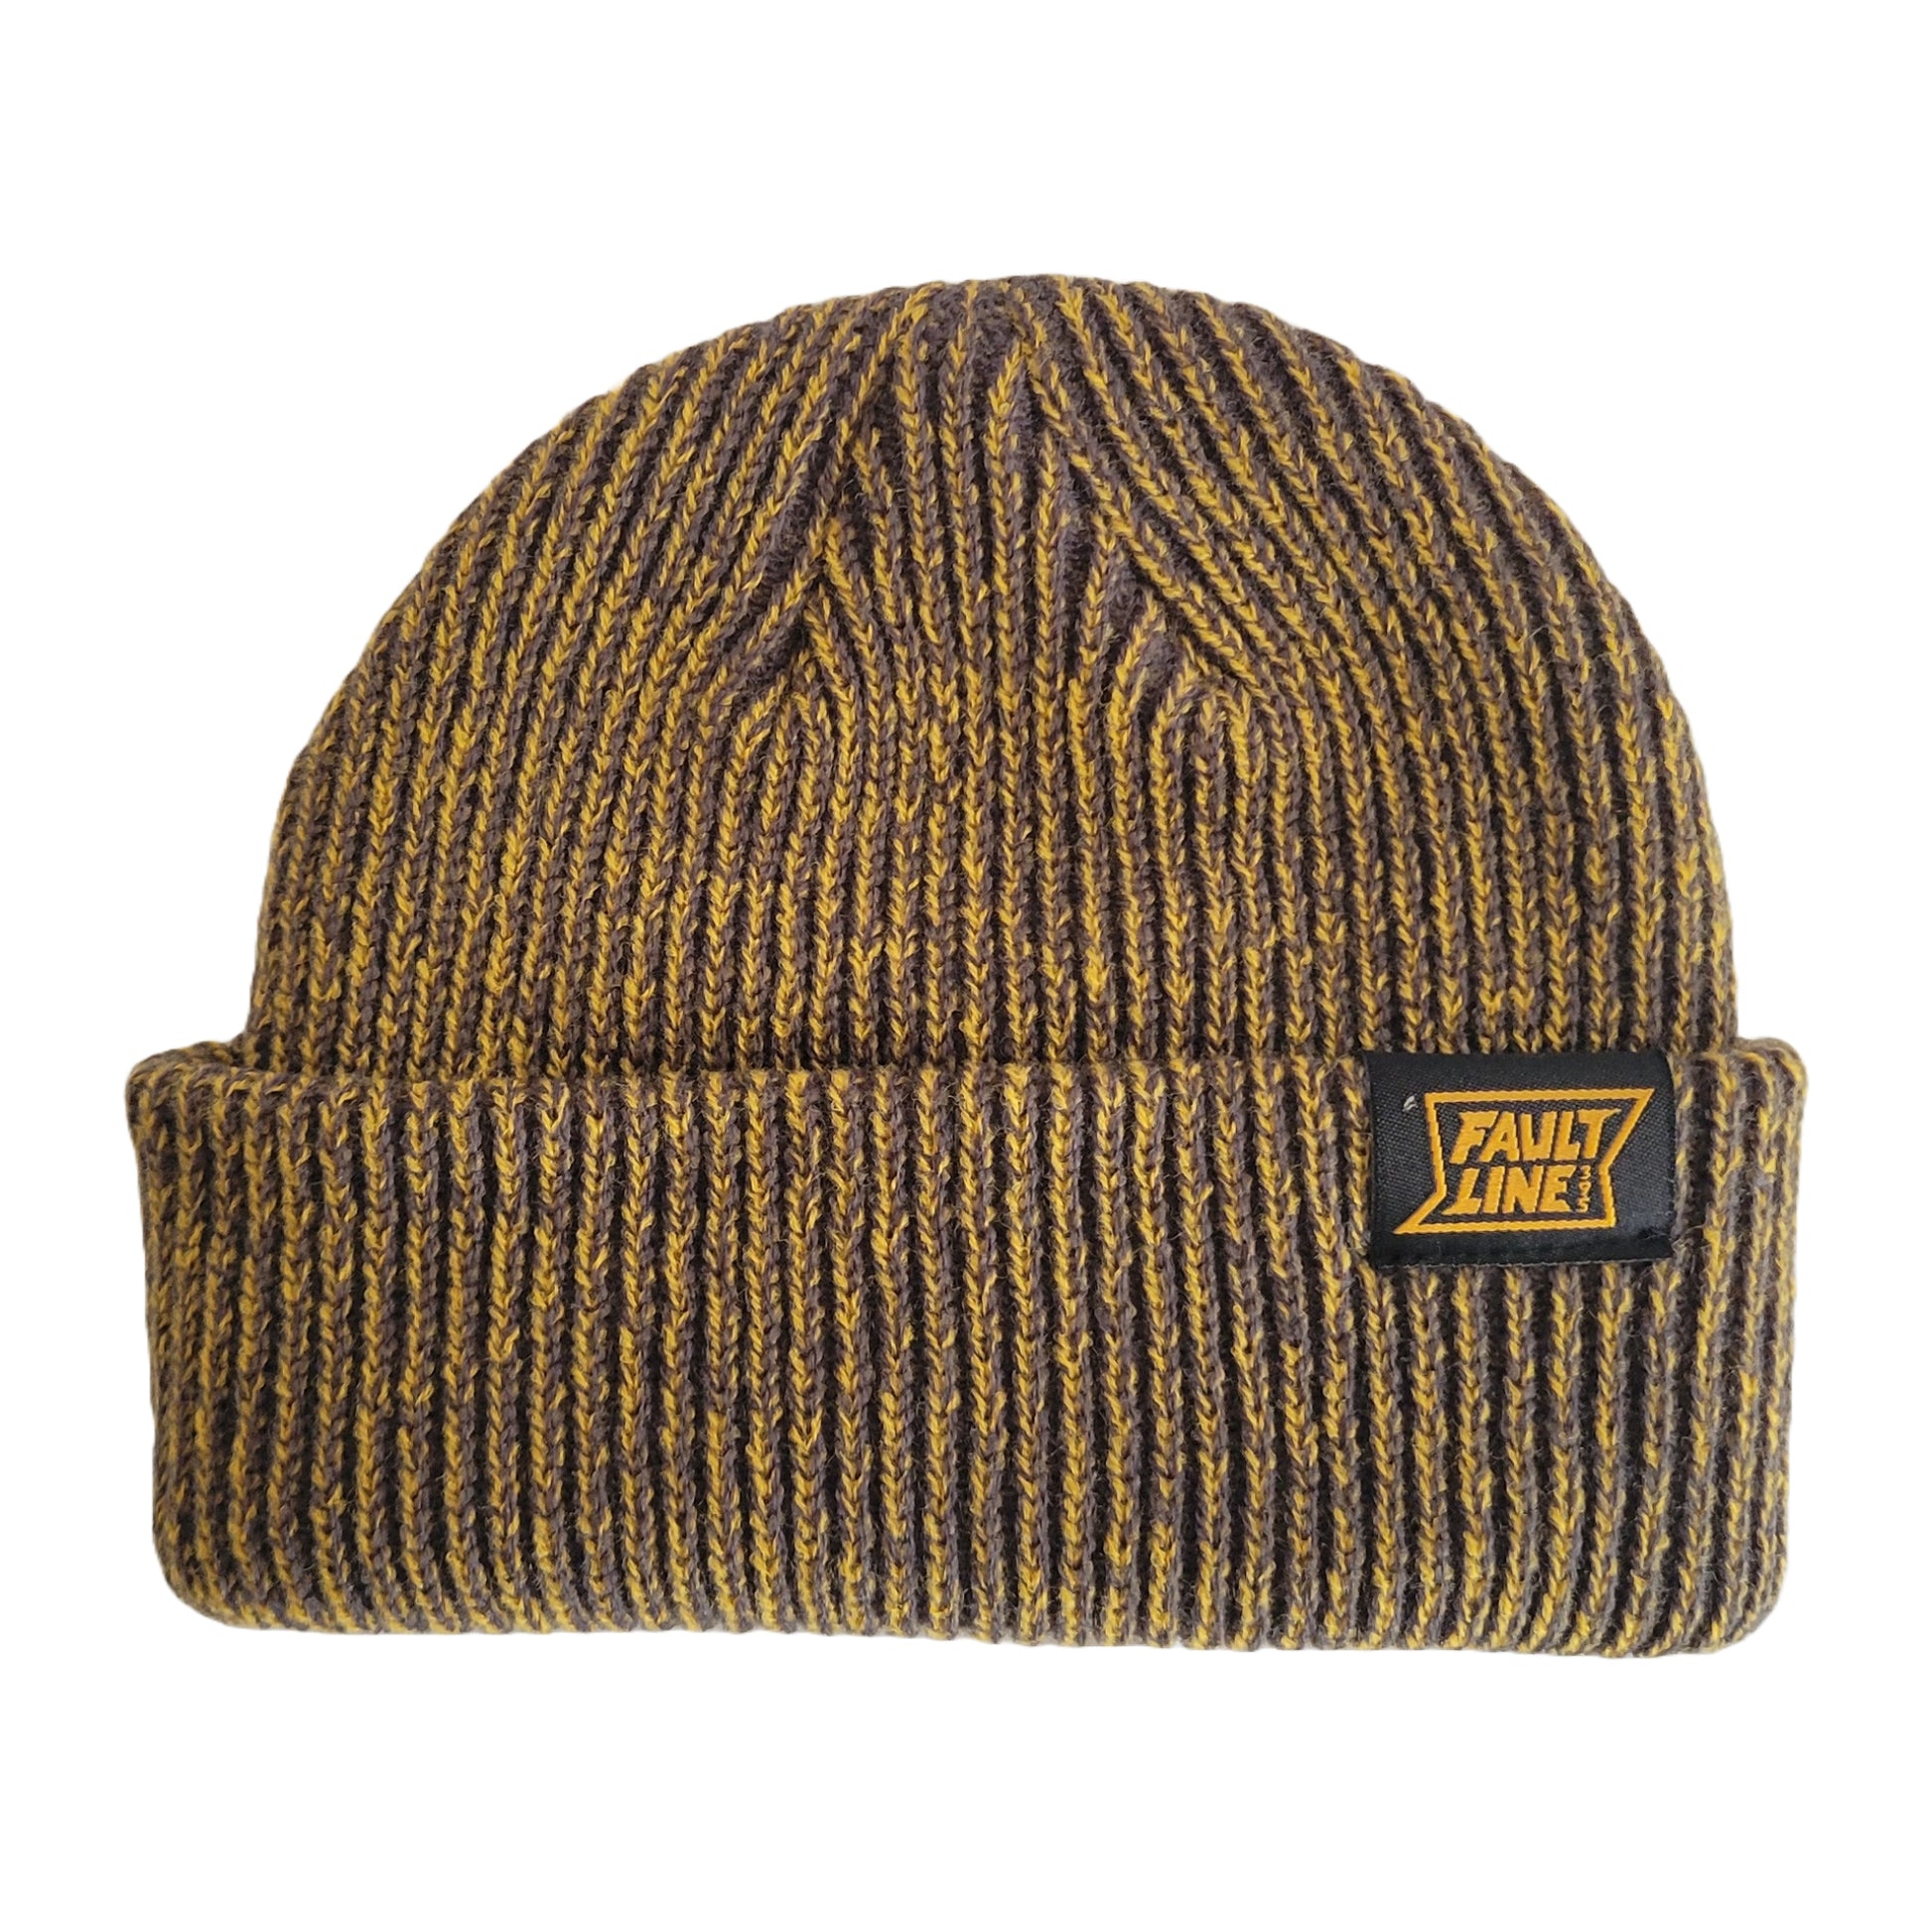 Broadway Beanie - Charcoal/Gold | FaultLine395 – Faultline395 | Beanies